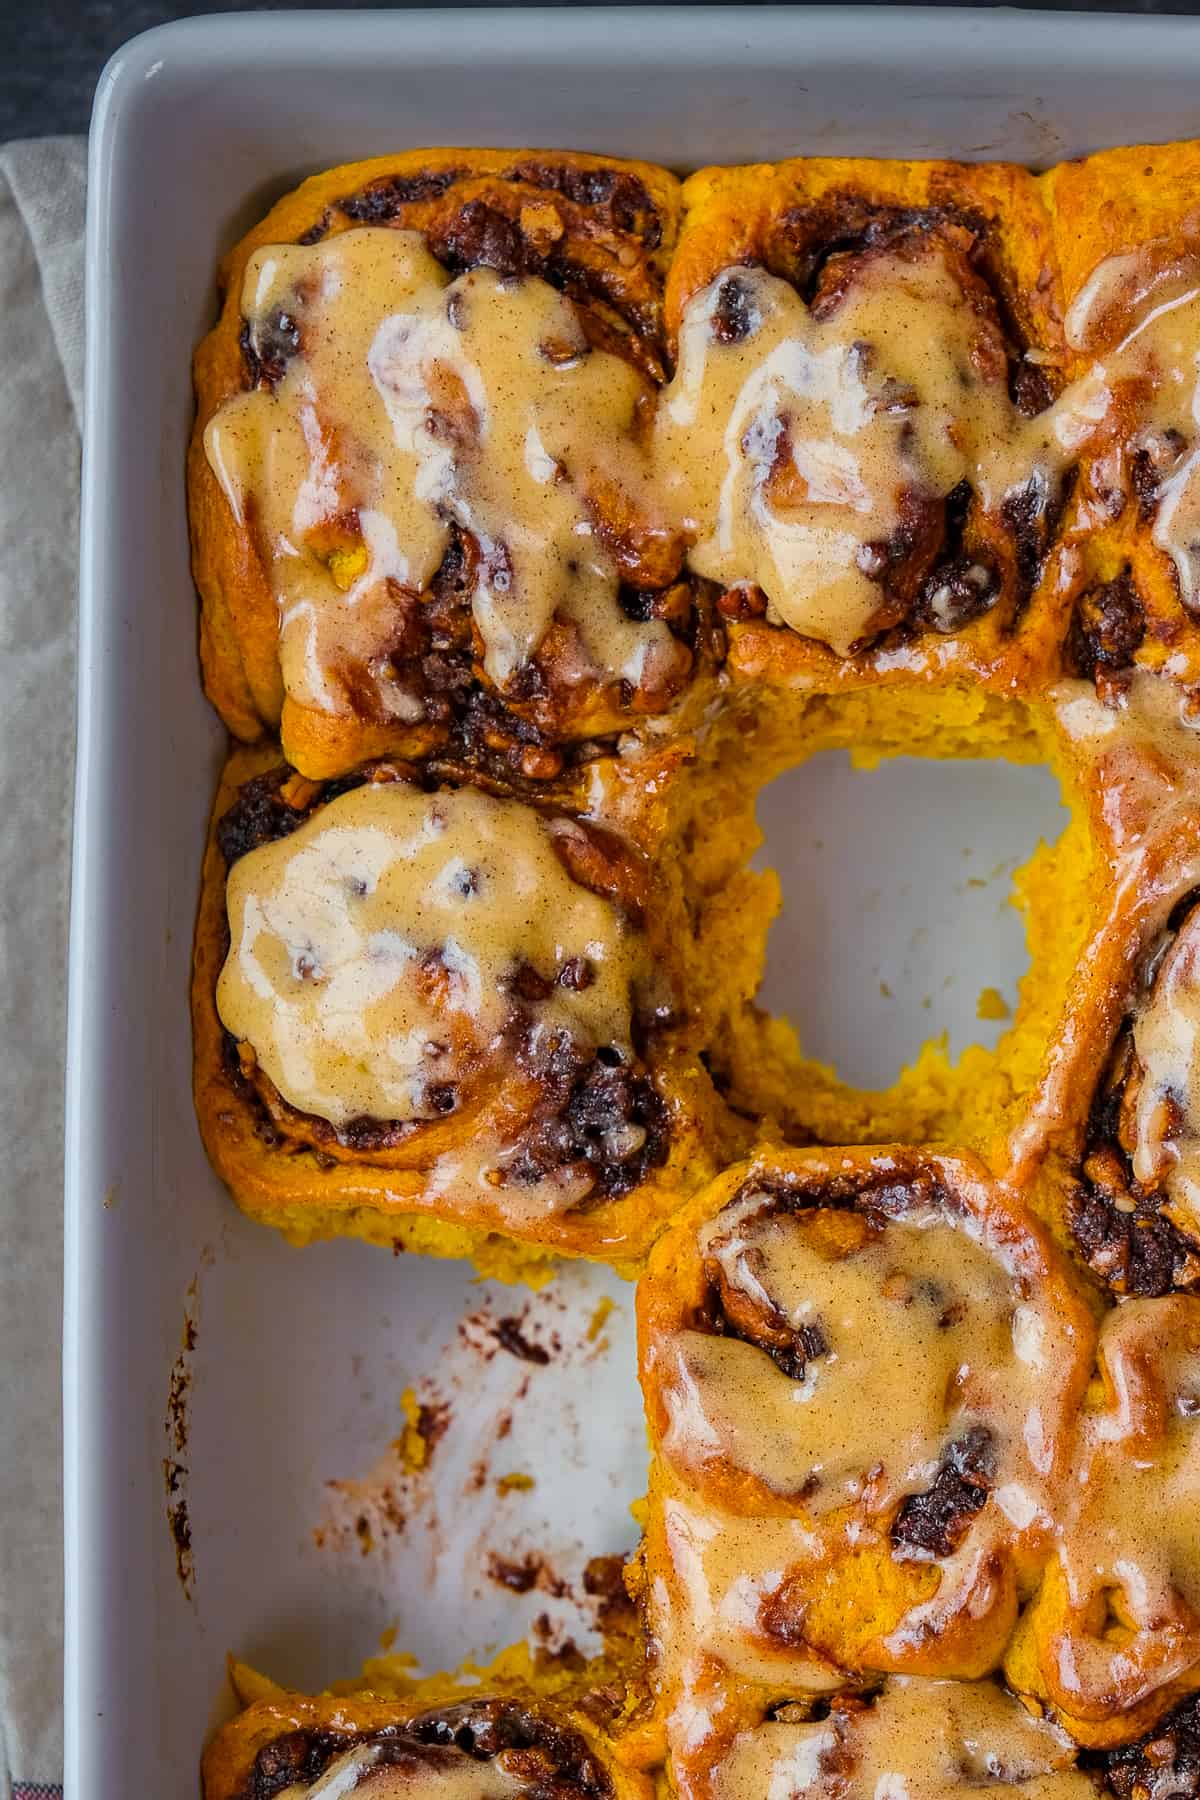 Pumpkin cinnamon rolls frosted with pumpkin spice butter photographed in a pan, two of them are taken.